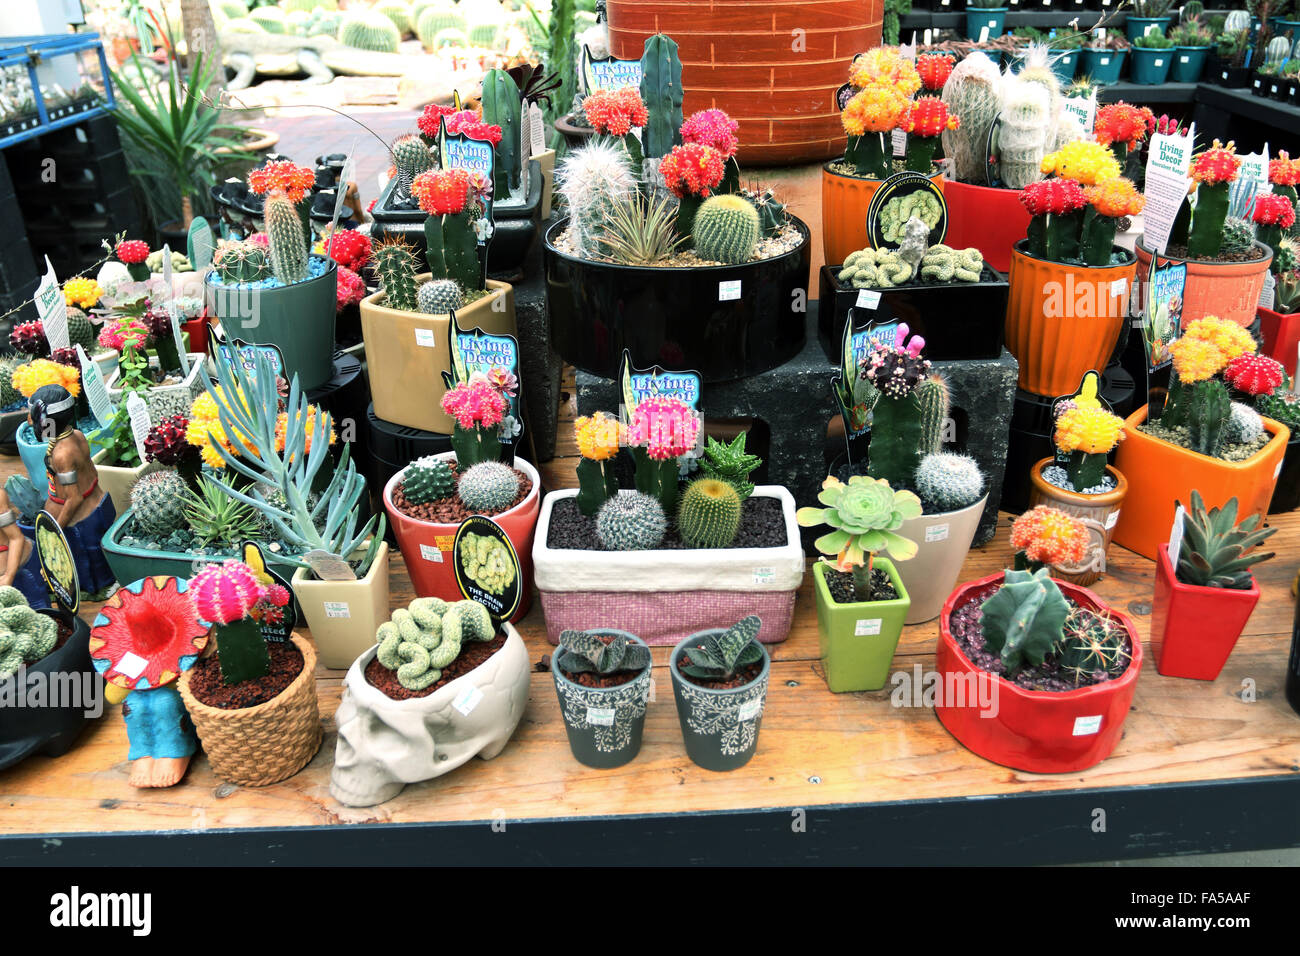 All kind of cactus and succulents for sale at a local nursery Stock Photo